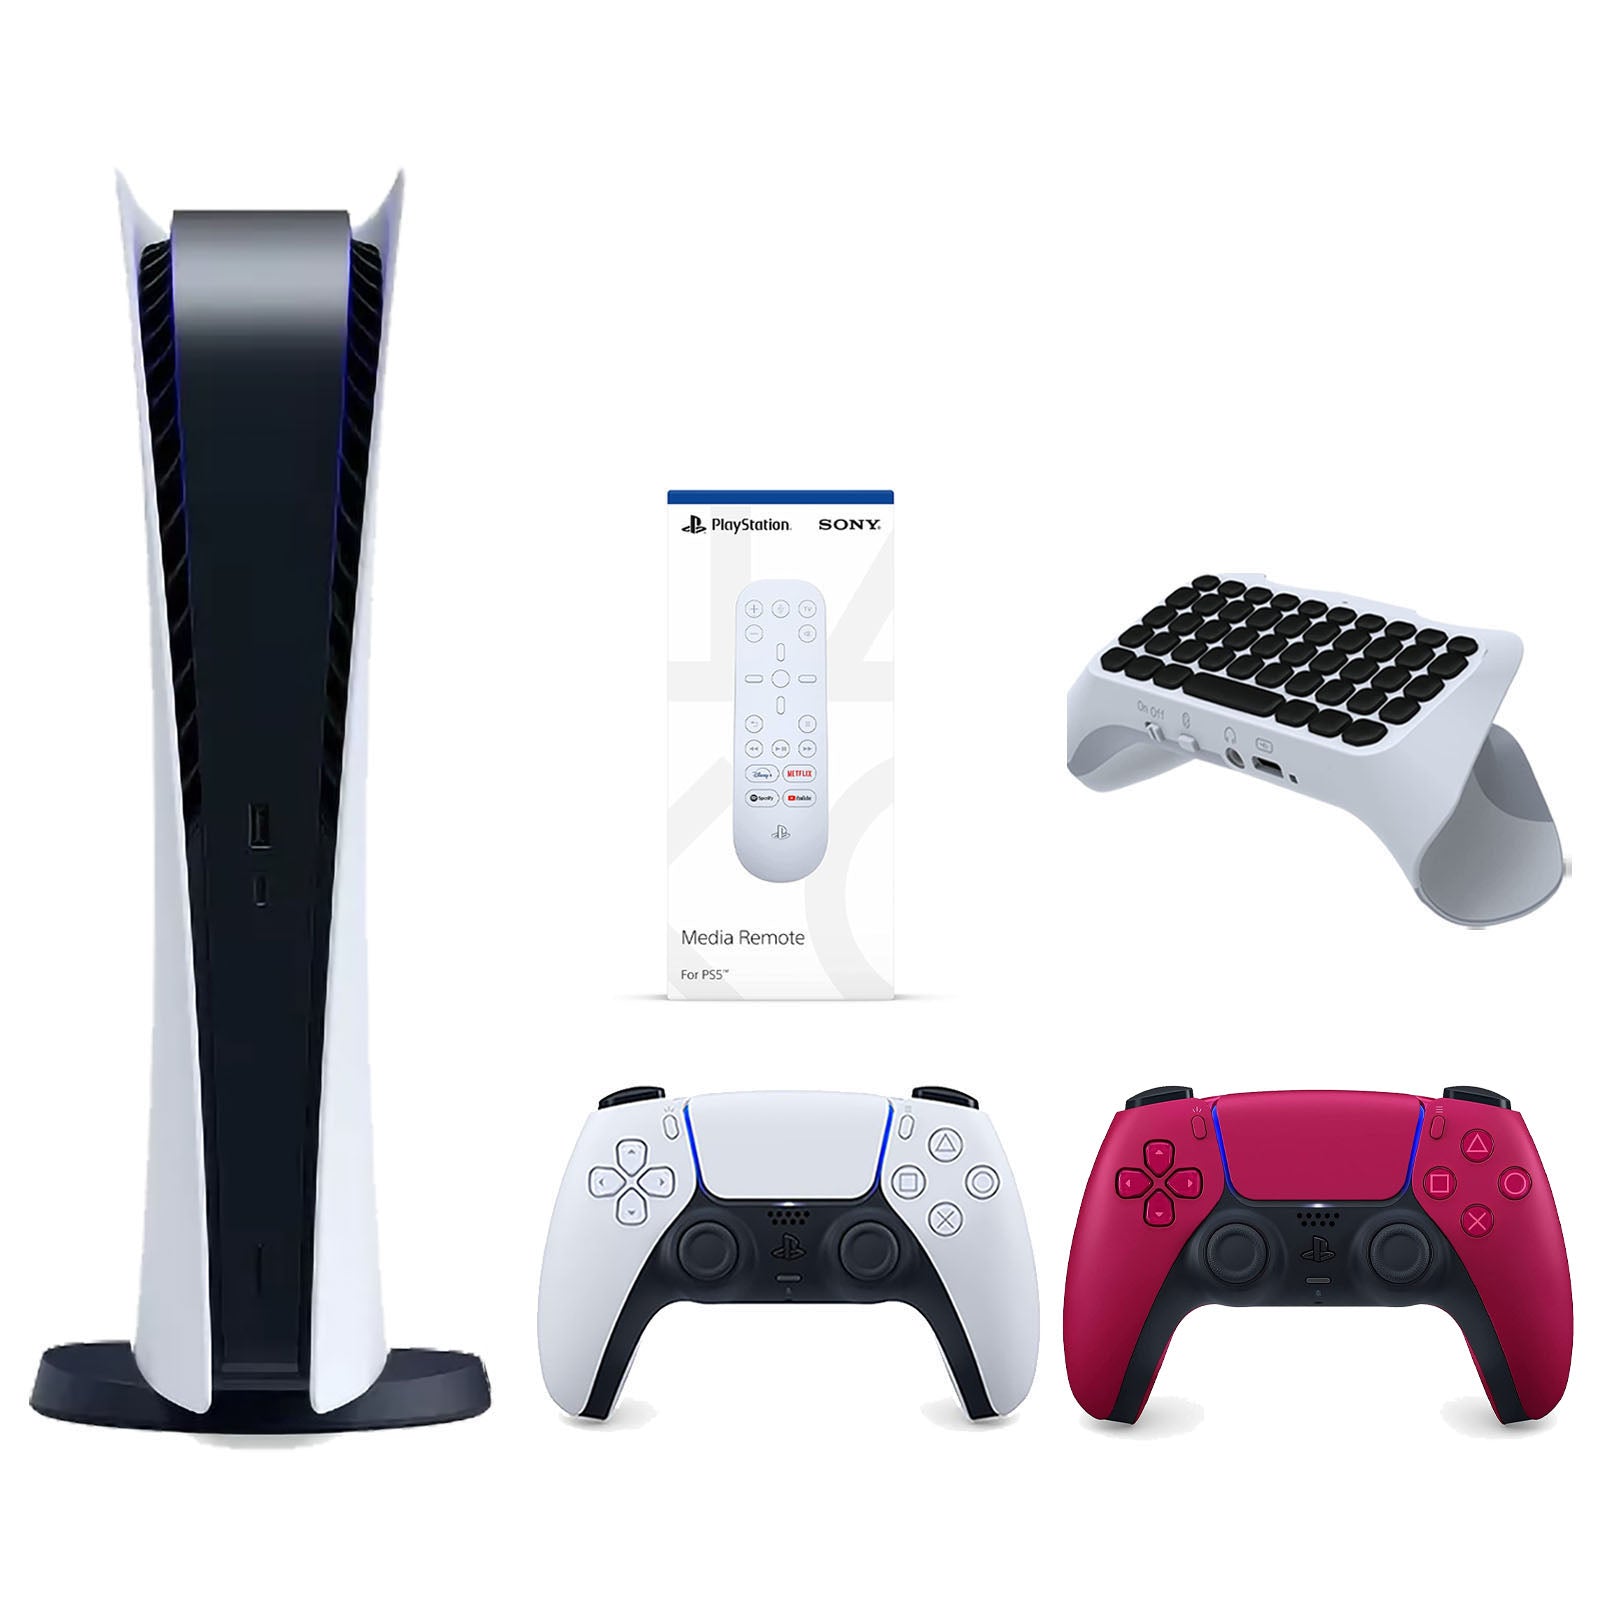 Sony Playstation 5 Digital Edition Console with Extra Red Controller, Media Remote and Surge QuickType 2.0 Wireless PS5 Controller Keypad Bundle - Pro-Distributing